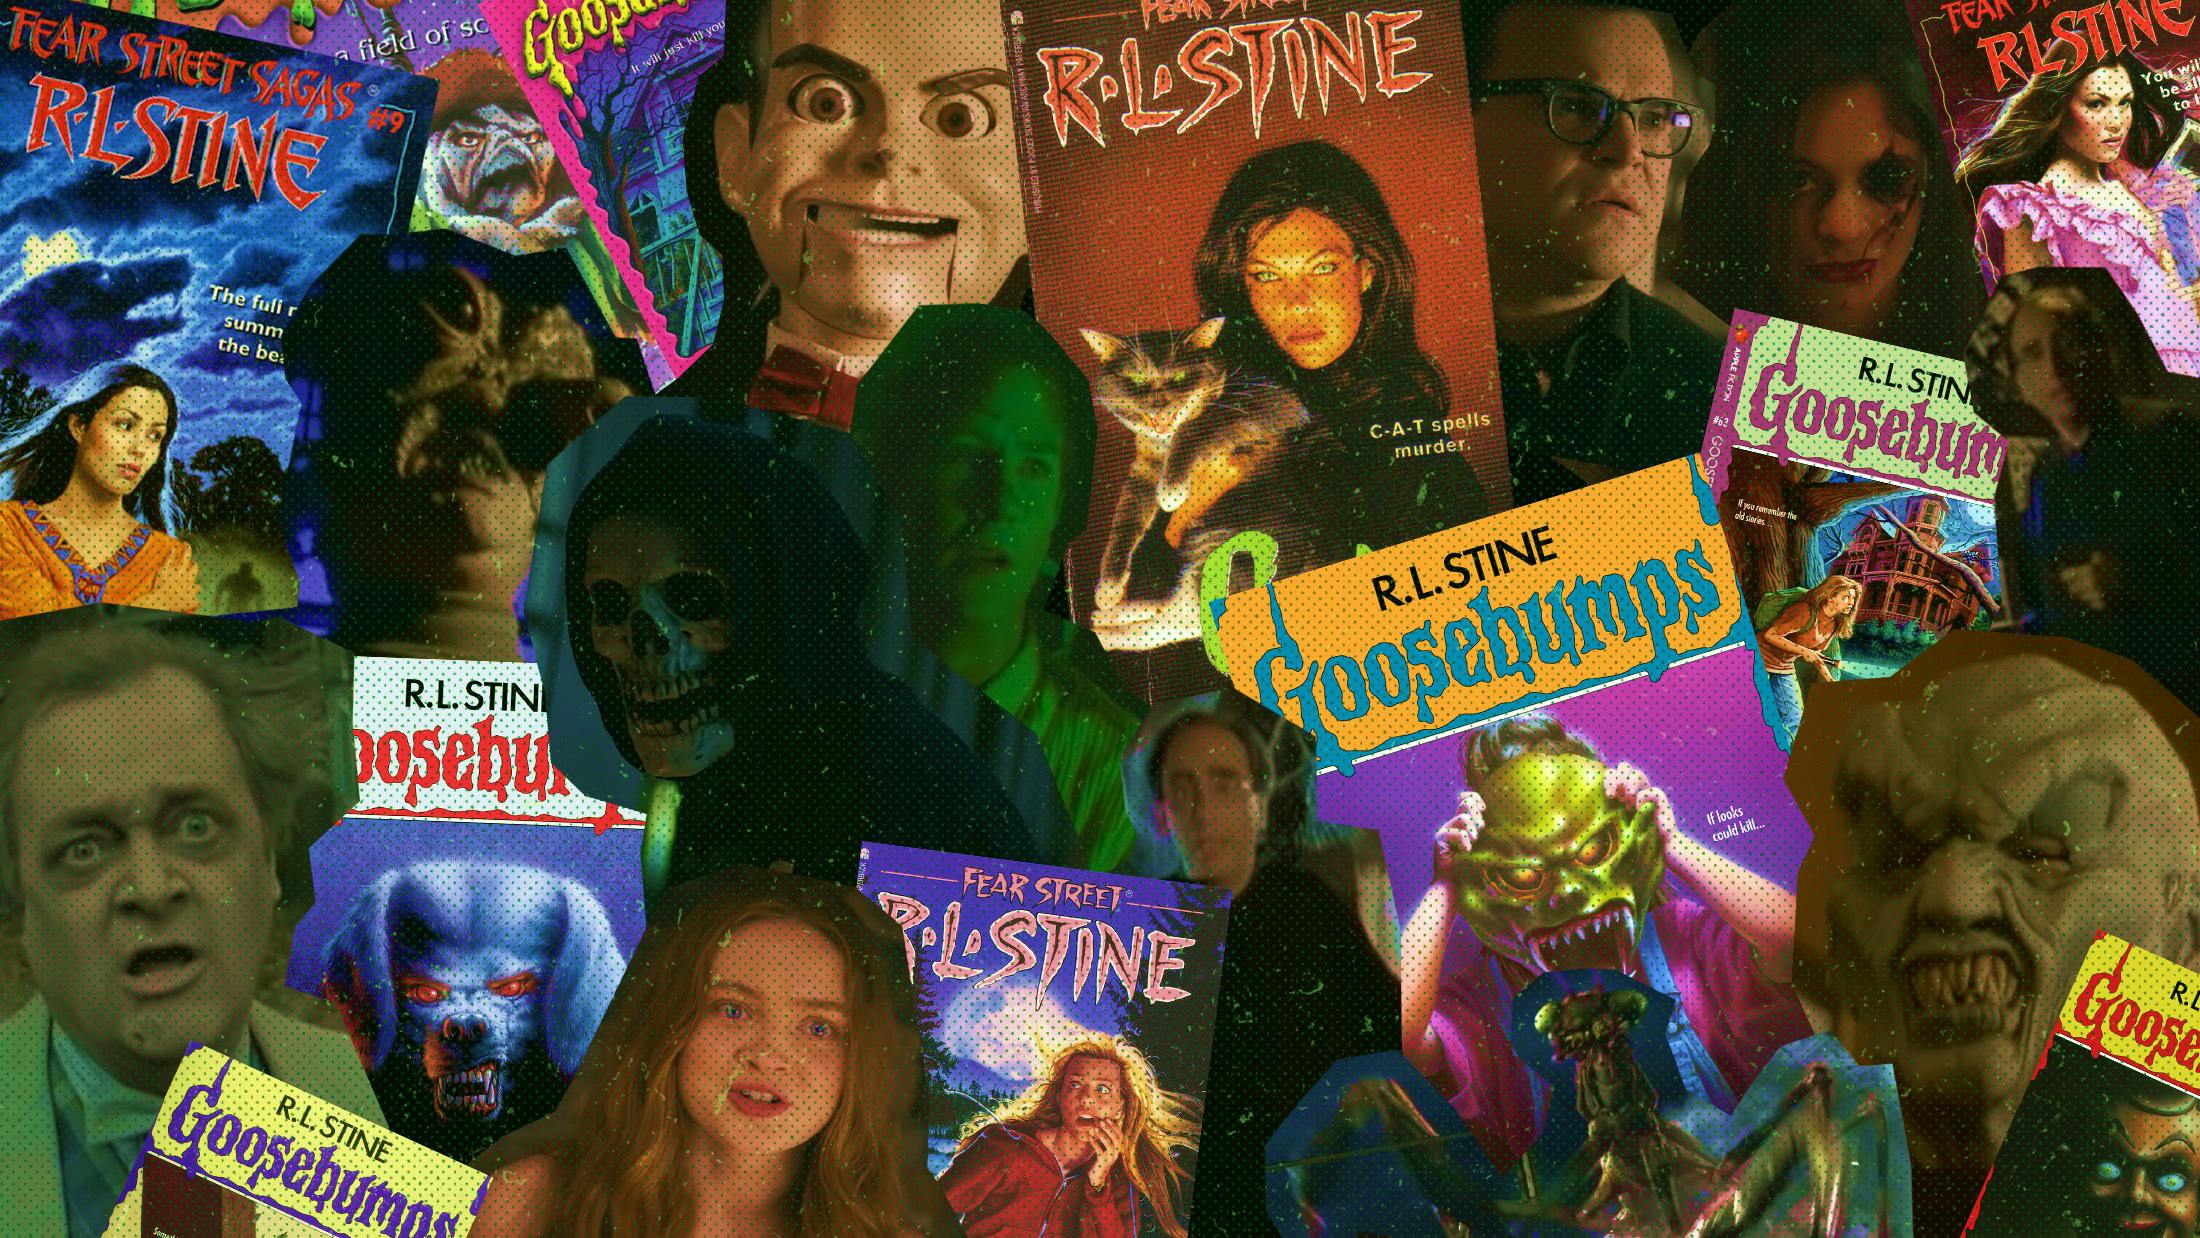 From Fear Street to Goosebumps: How R.L. Stine terrified a generation